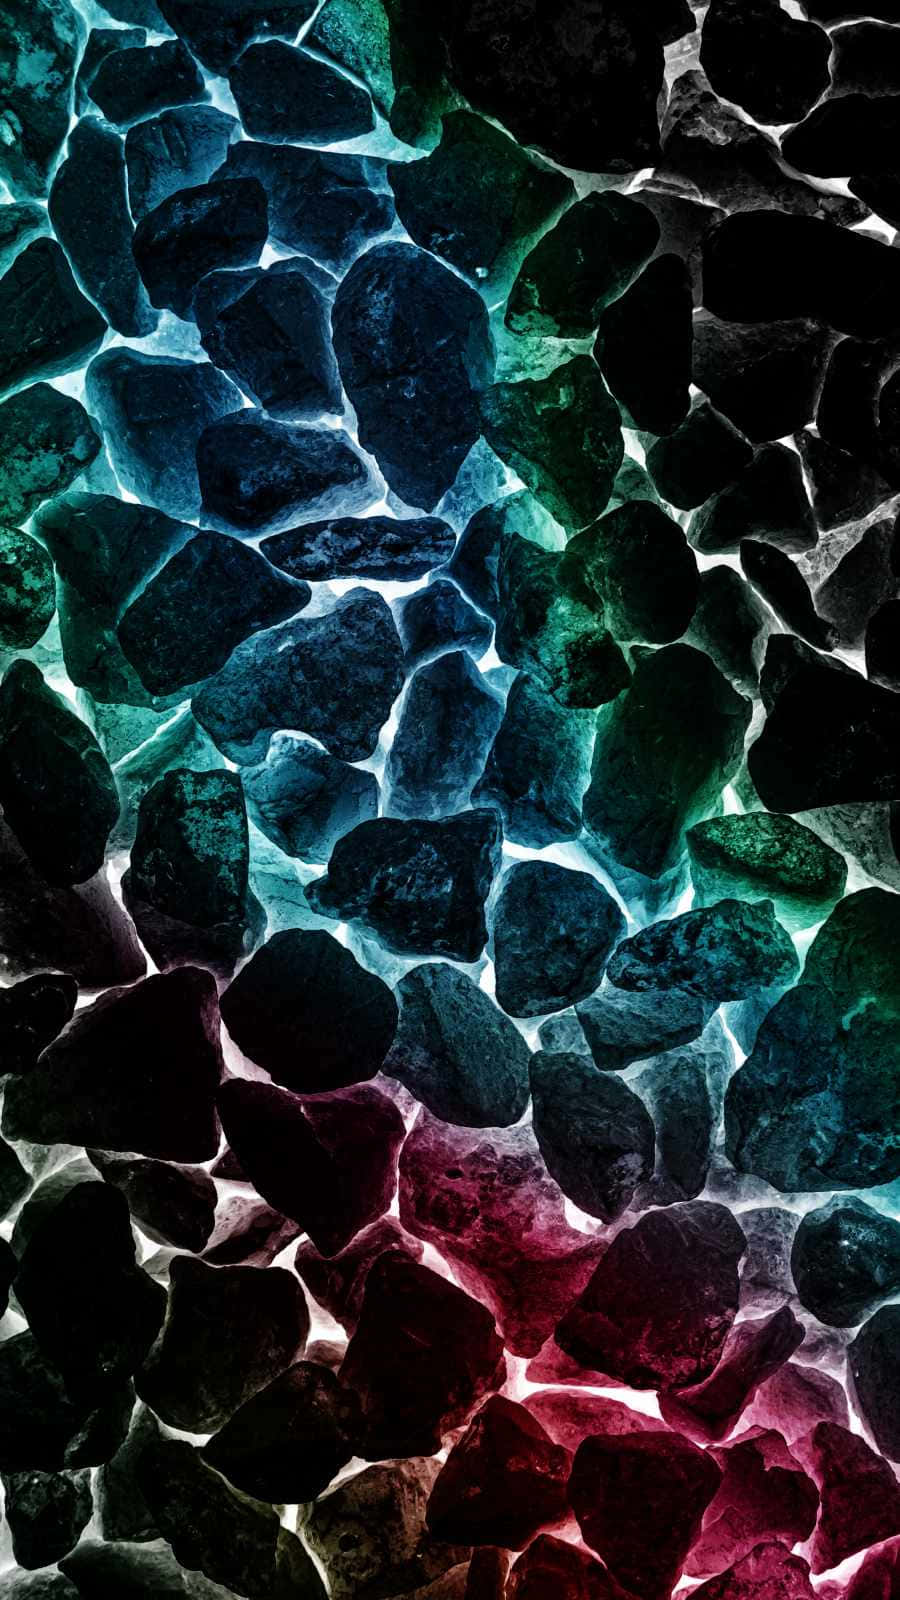 Enjoy The Colorful Possibilities Of The Latest Iphone Model Wallpaper